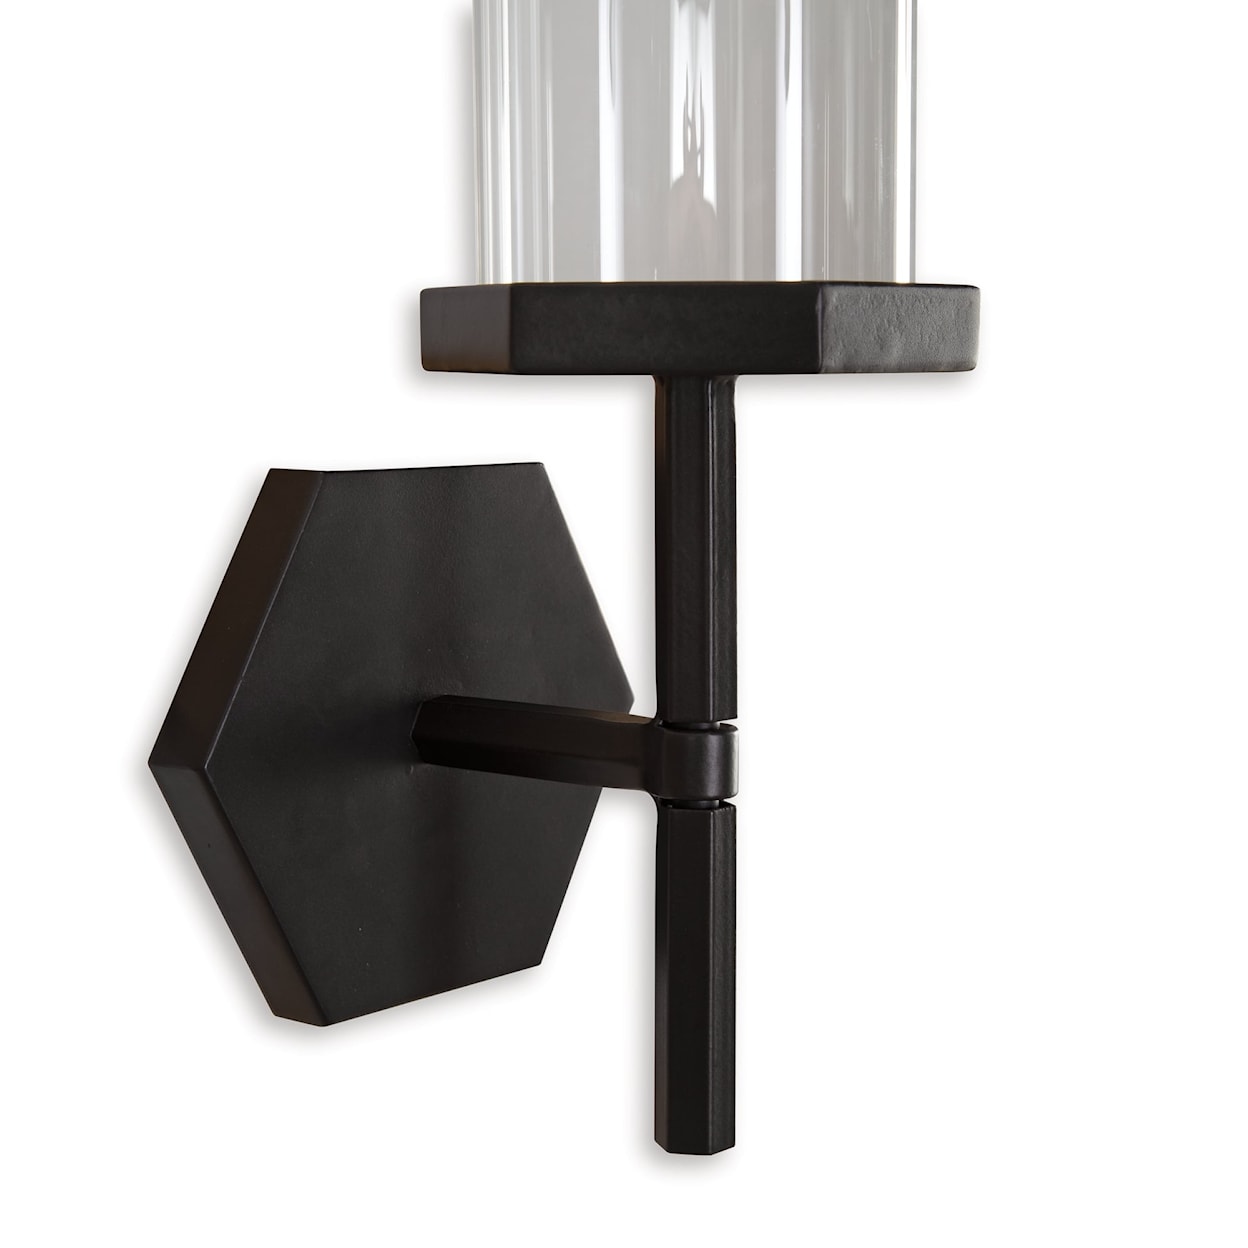 Signature Design by Ashley Teelston Wall Sconce